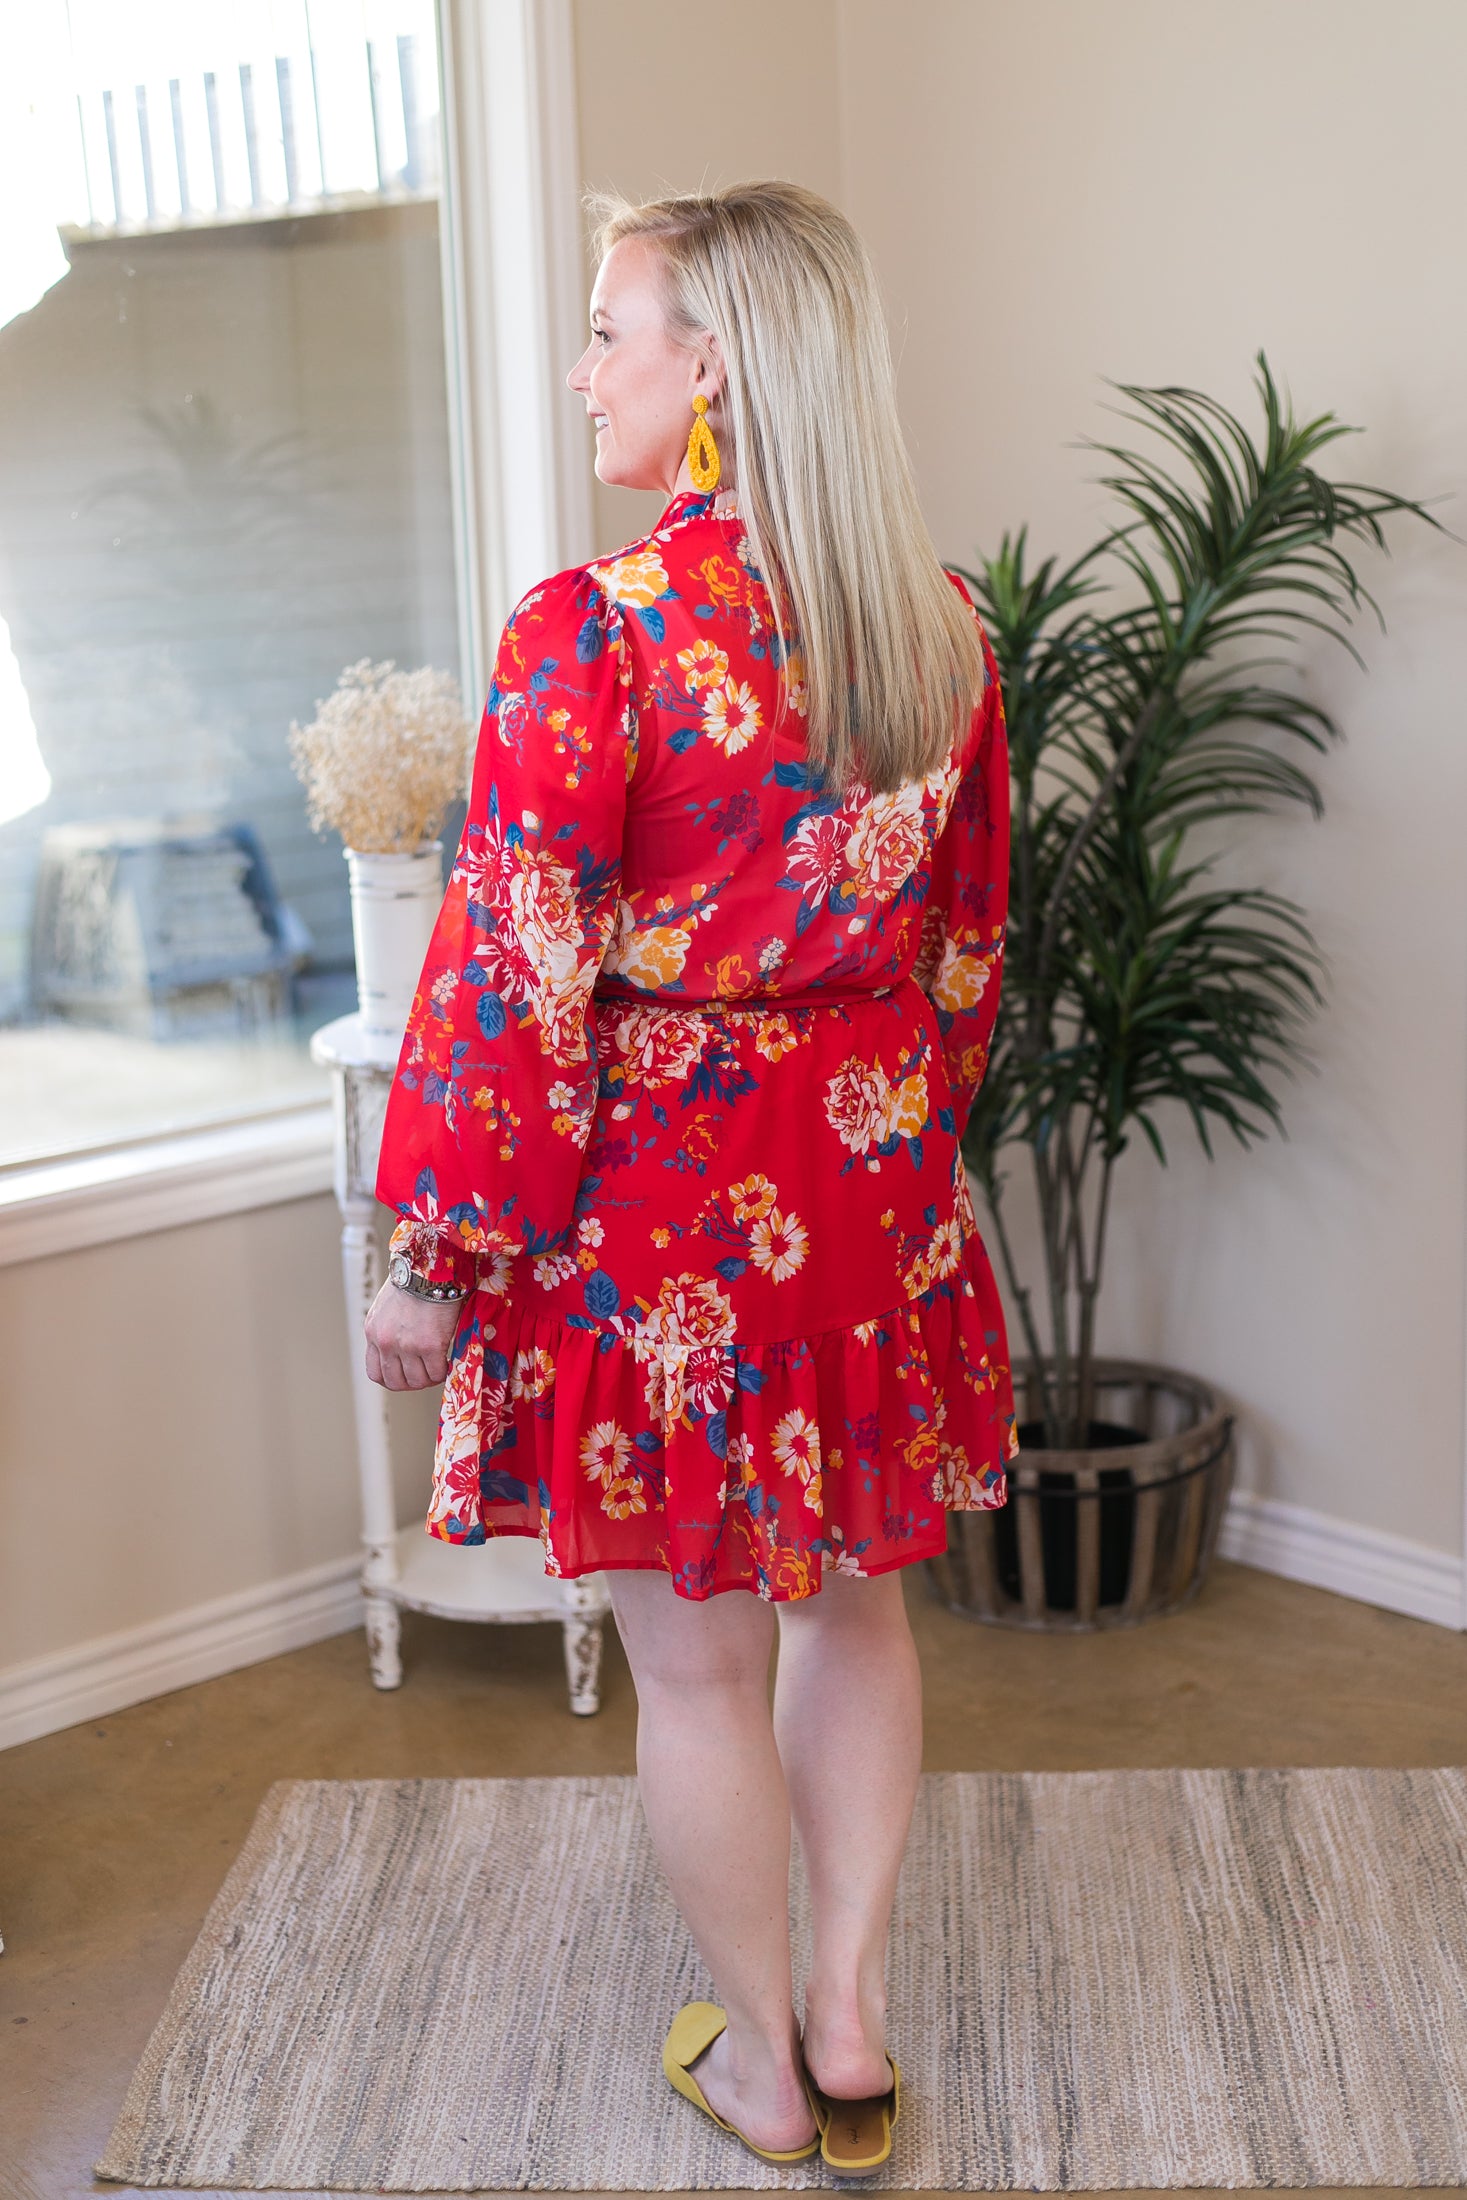 Last Chance Size Small & Medium | Blooming With Love Floral Long Sleeve Mini Dress with High Neck in Red - Giddy Up Glamour Boutique